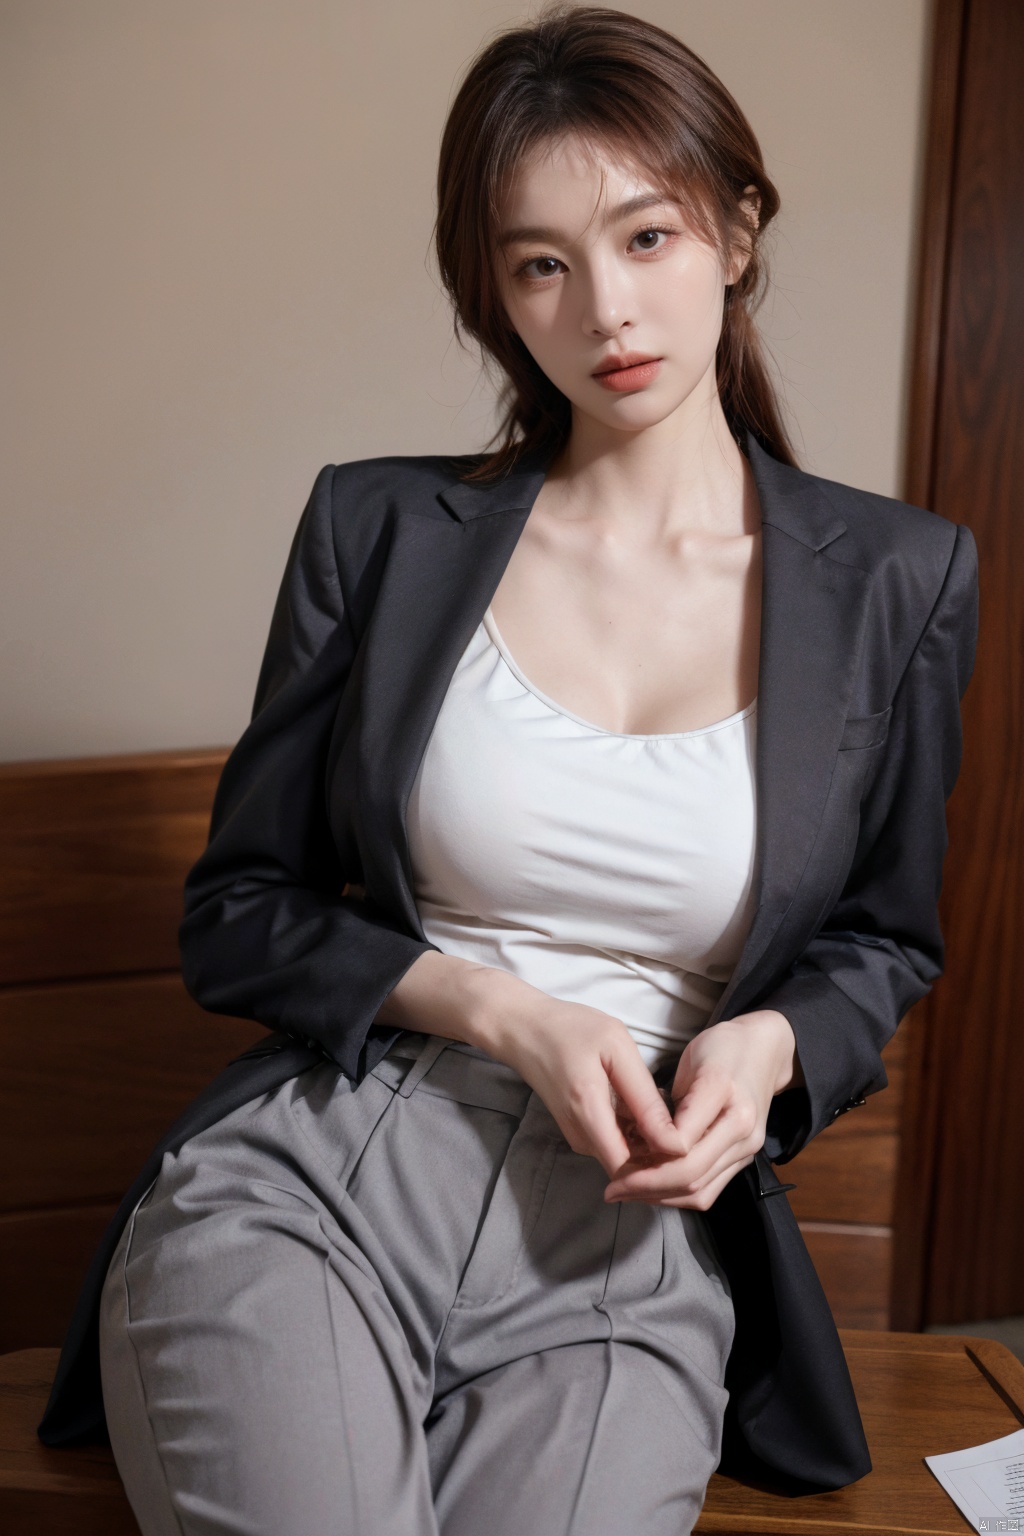  Xlongni,1Girl, suit, (photo reality: 1.3) , Edge lighting, (high detail skin: 1.2) , 8K Ultra HD, high quality, high resolution, (photo reality: 1.3) , wear a purple suit jacket, white shirt inside, large breasts, high-grade feeling, texture pull full, 1 girl,Xlongni,(big_breasts:1.39)